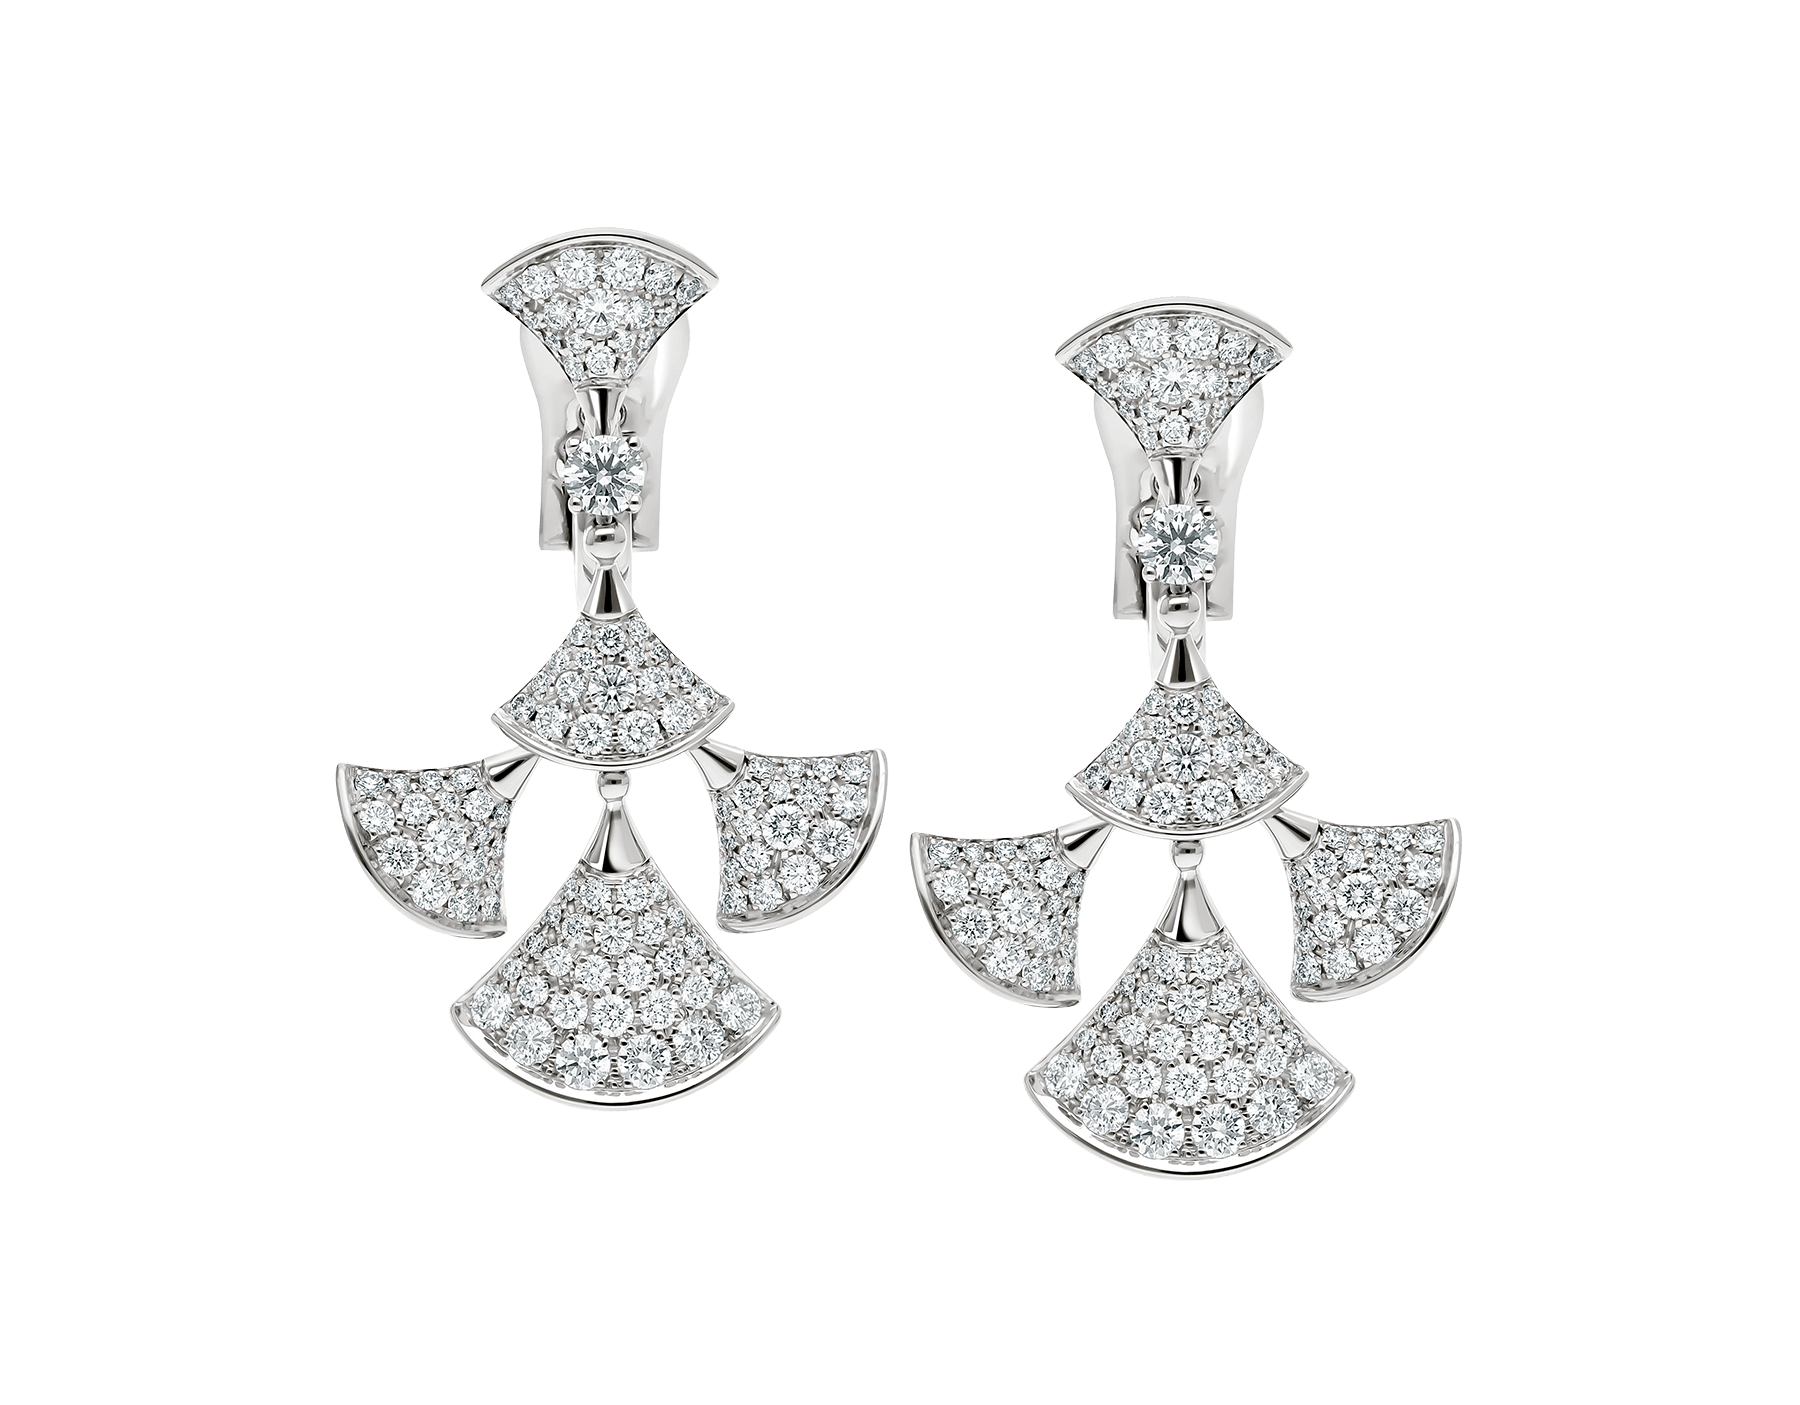 DIVAS' DREAM earrings in white gold, set with a diamond and full pavé diamonds. 352809 image 1